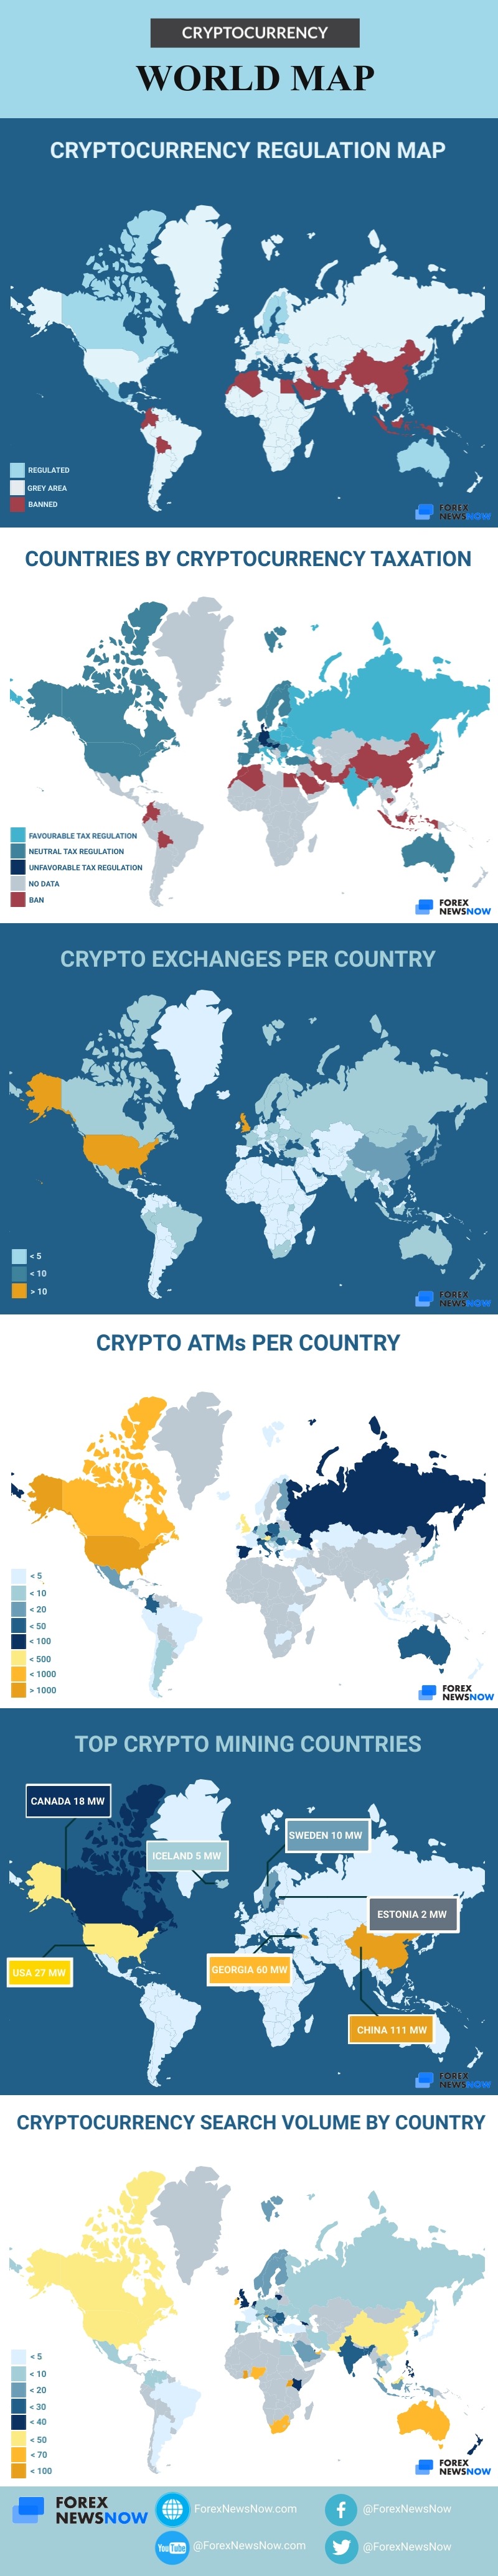 Cryptocurrency world map